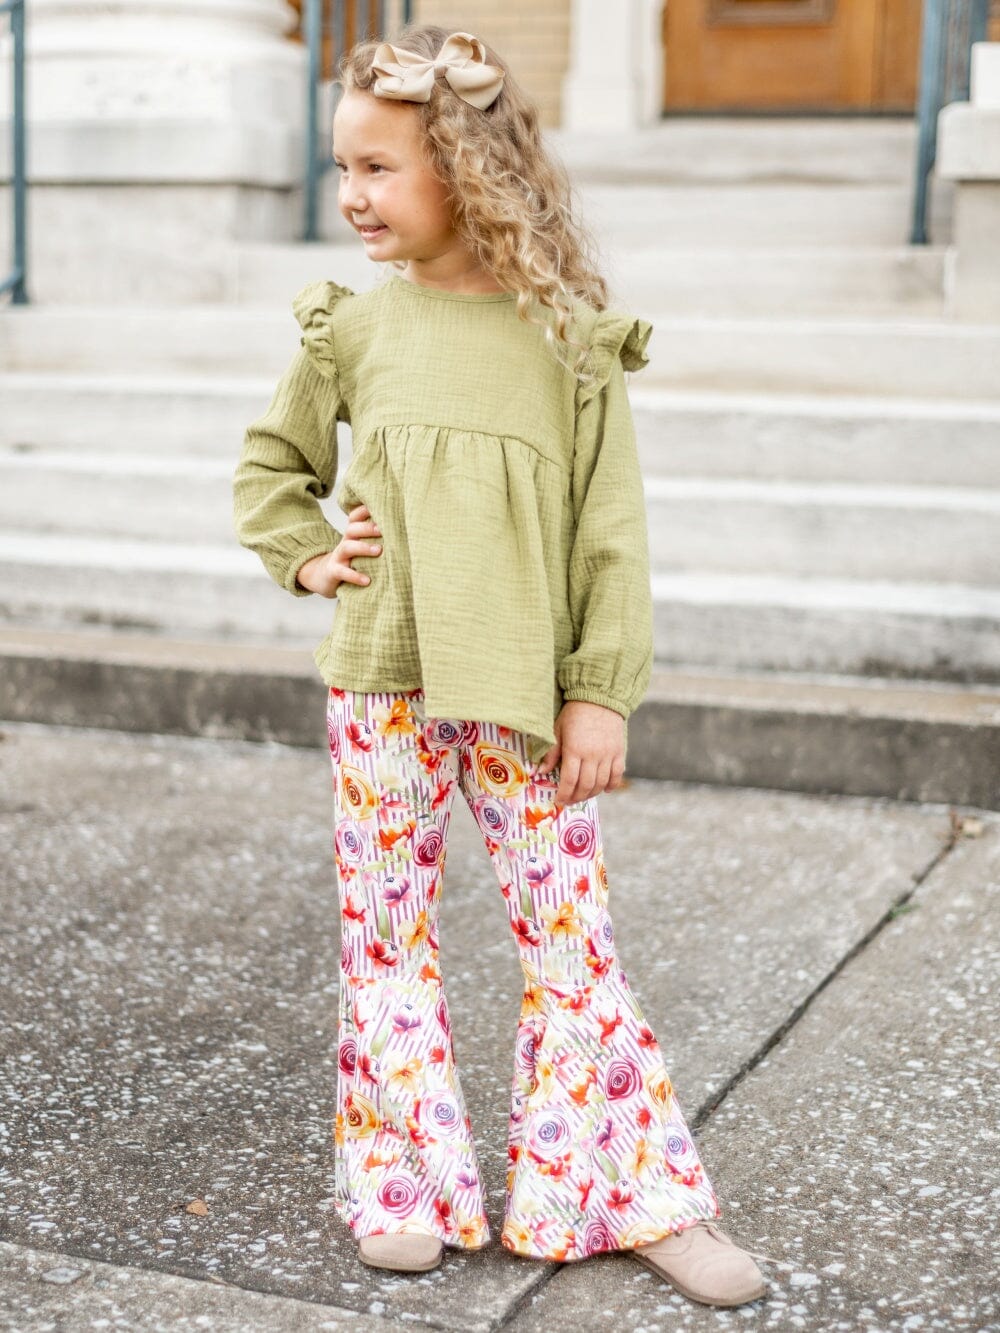 Bell Bottoms, Bell Bottom Pants & Sequin Bell Bottom Outfits For Little Girls & Toddlers